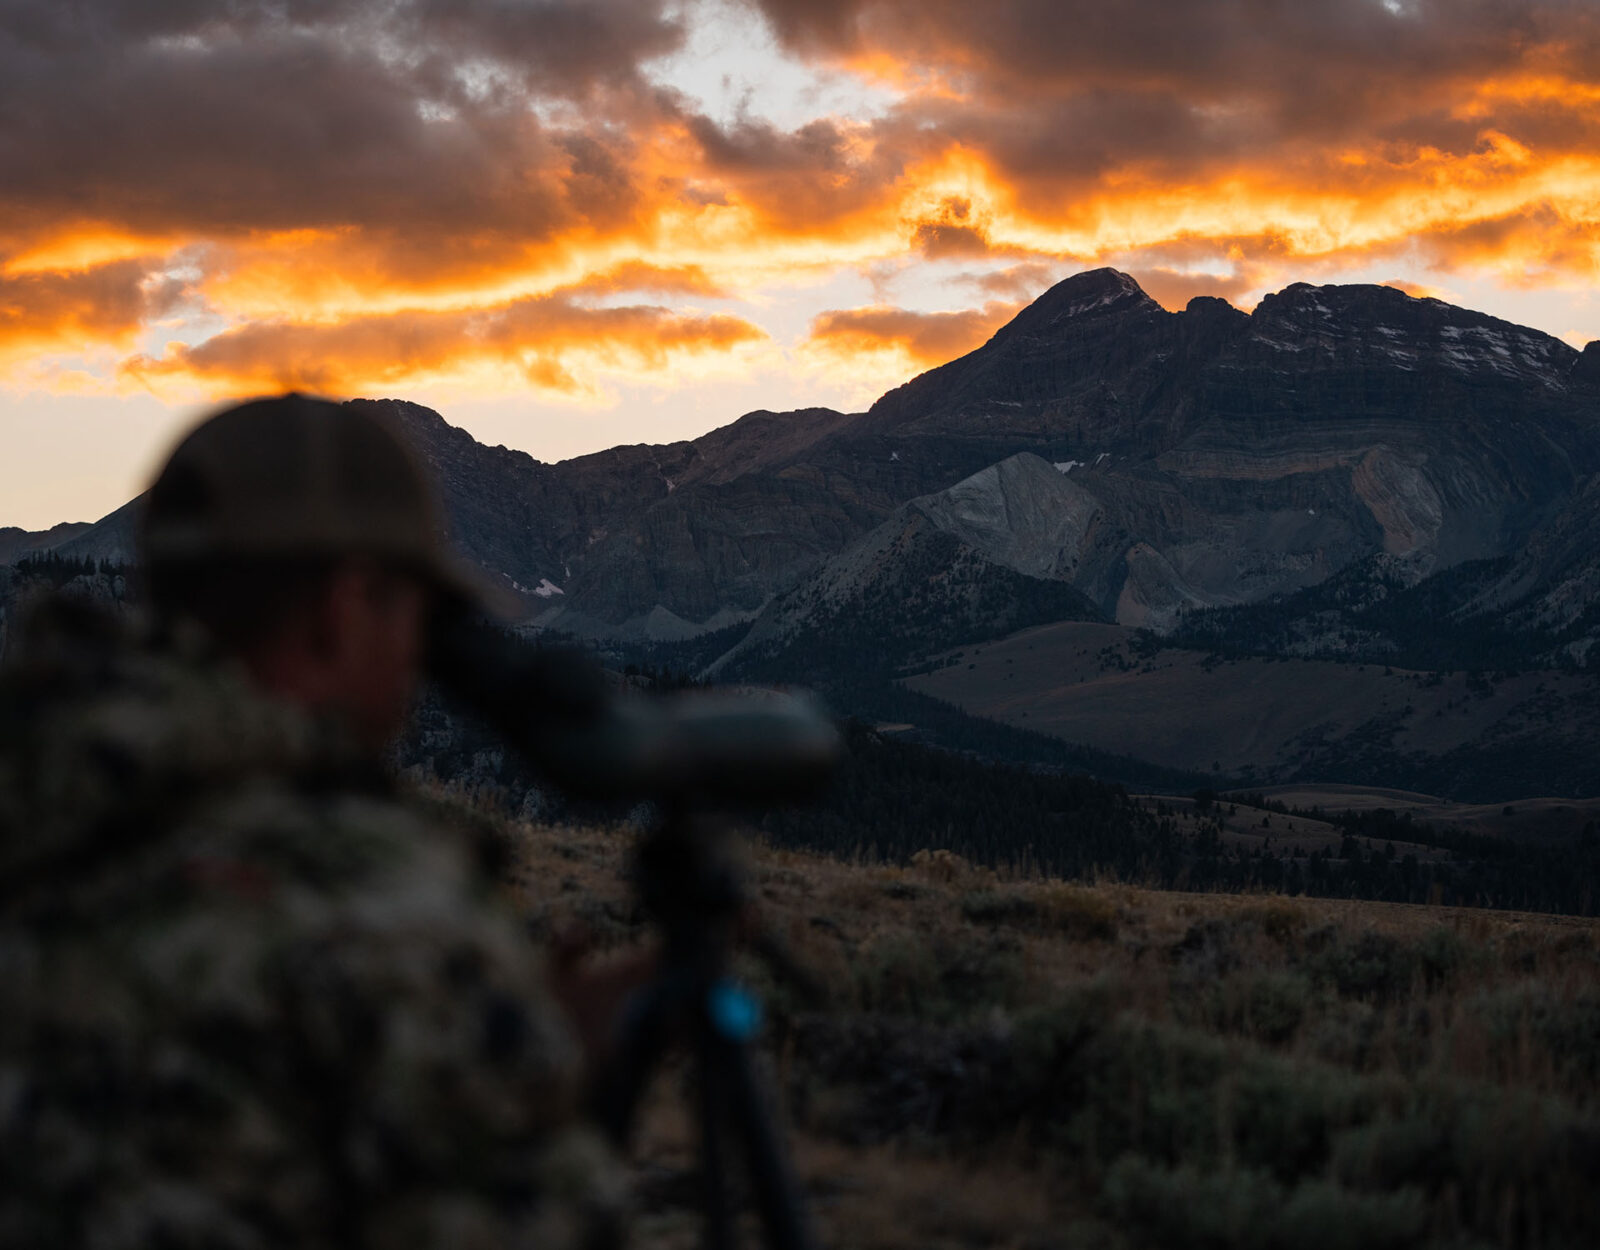 Man glassing while hunting in front of mountains at sunset